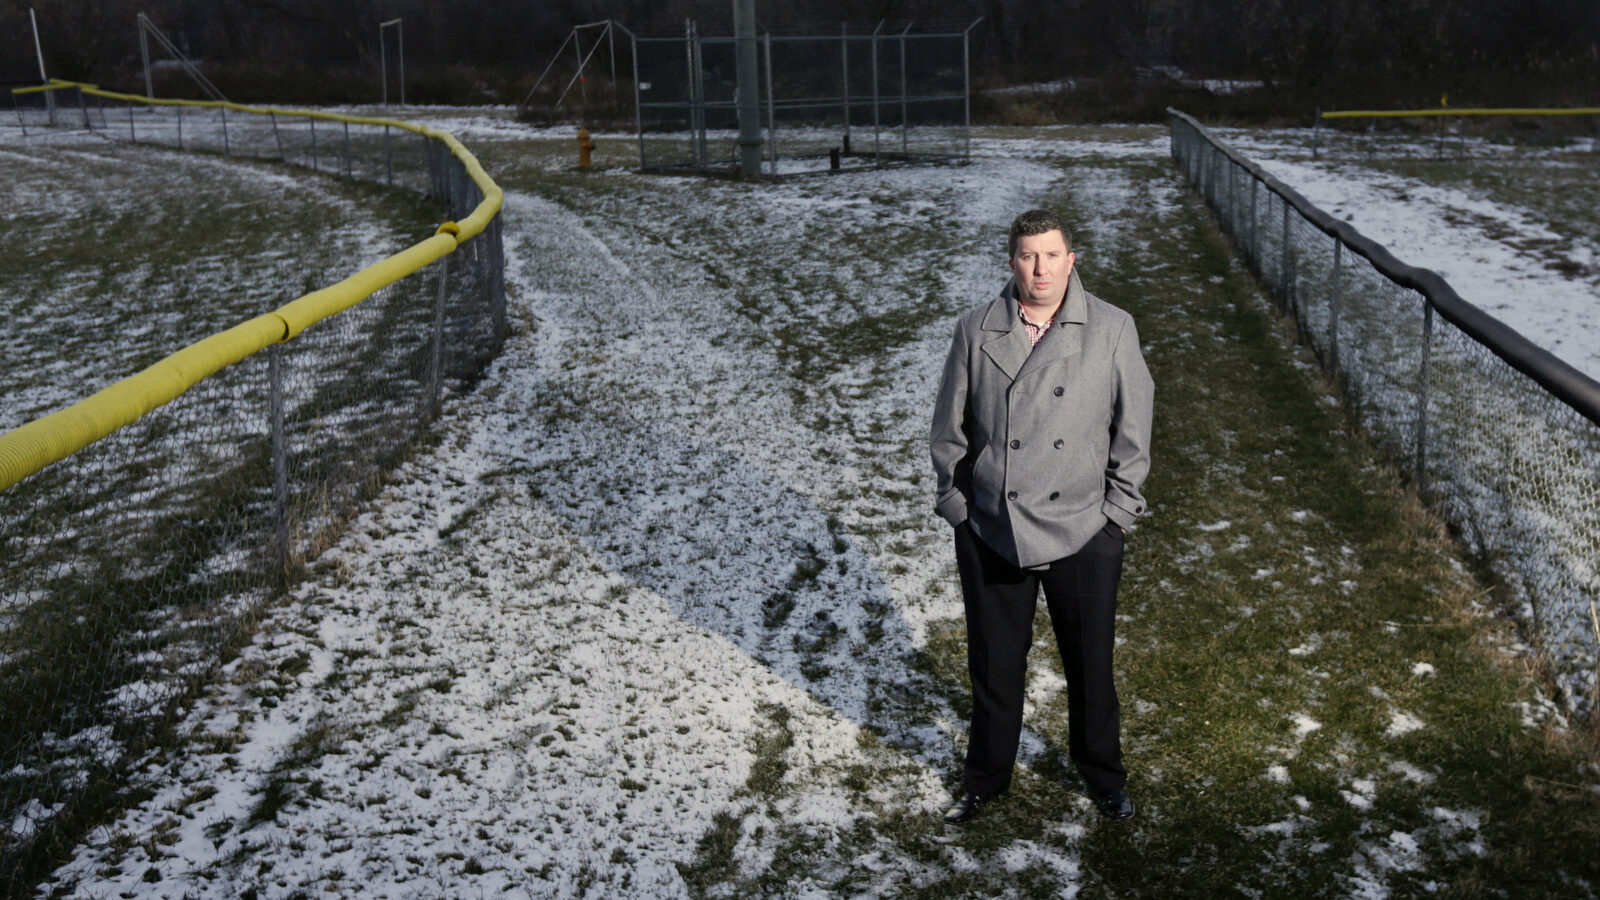 In this Jan. 21, 2016, file photo, Michael Hickey poses near Hoosick Falls municipal well 7 between two baseball fields in Hoosick Falls, N.Y. PFOA, long used in the manufacuring of Teflon pans, Gore-Tex jackets, ski wax, and many other products has turned up in the water in factory towns around the country like Hoosick Falls. Hickey, a local insurance underwriter, exposed the contamination in Hoosick Falls, a bucolic community near the Vermont state line. (AP/Mike Groll)